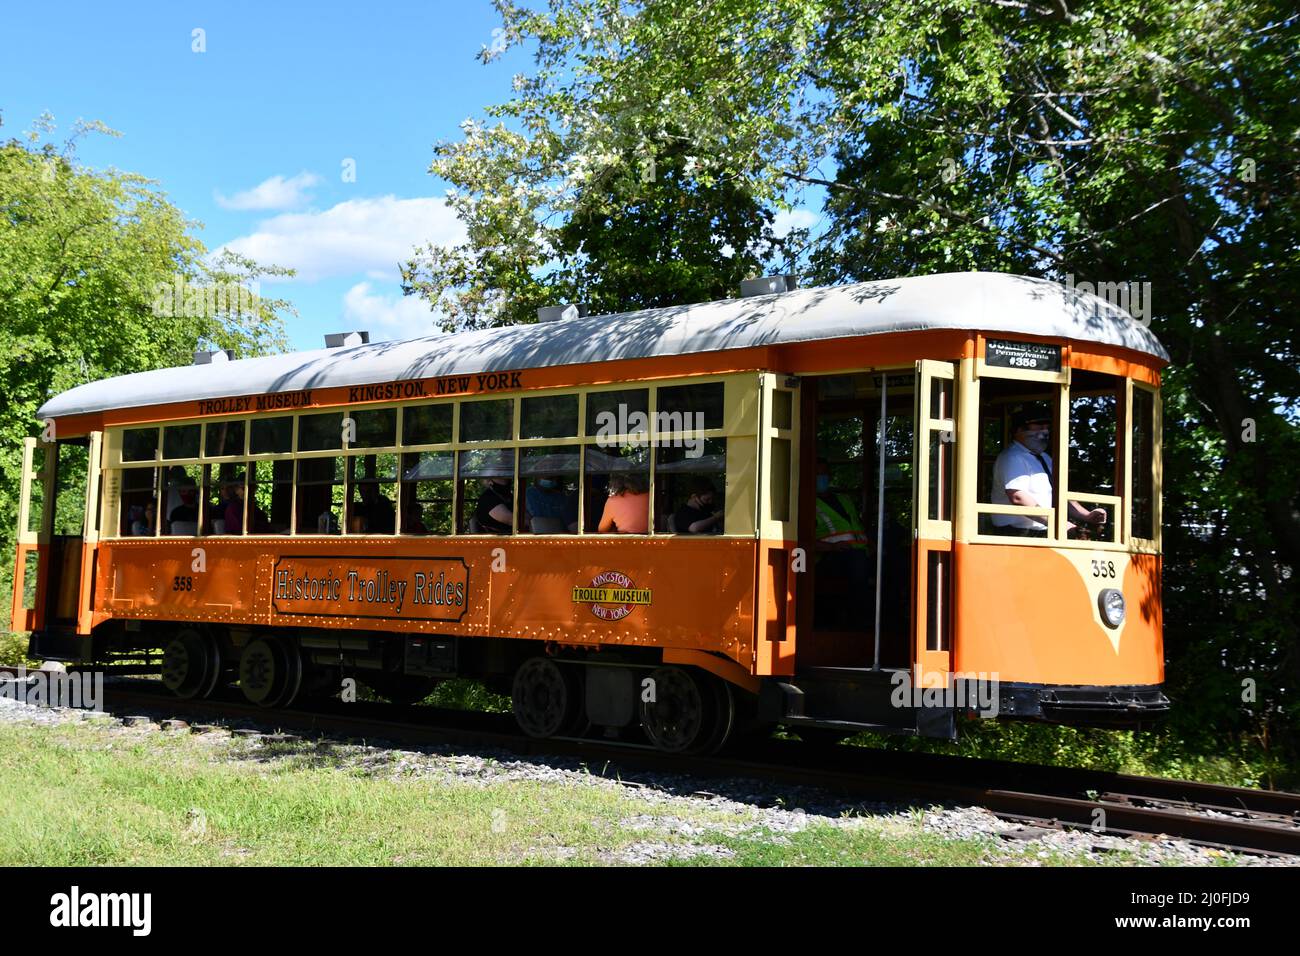 Johnstown Traction Company Trolley No. 358 at Trolley Museum of New York in  Kingston, New York Stock Photo - Alamy